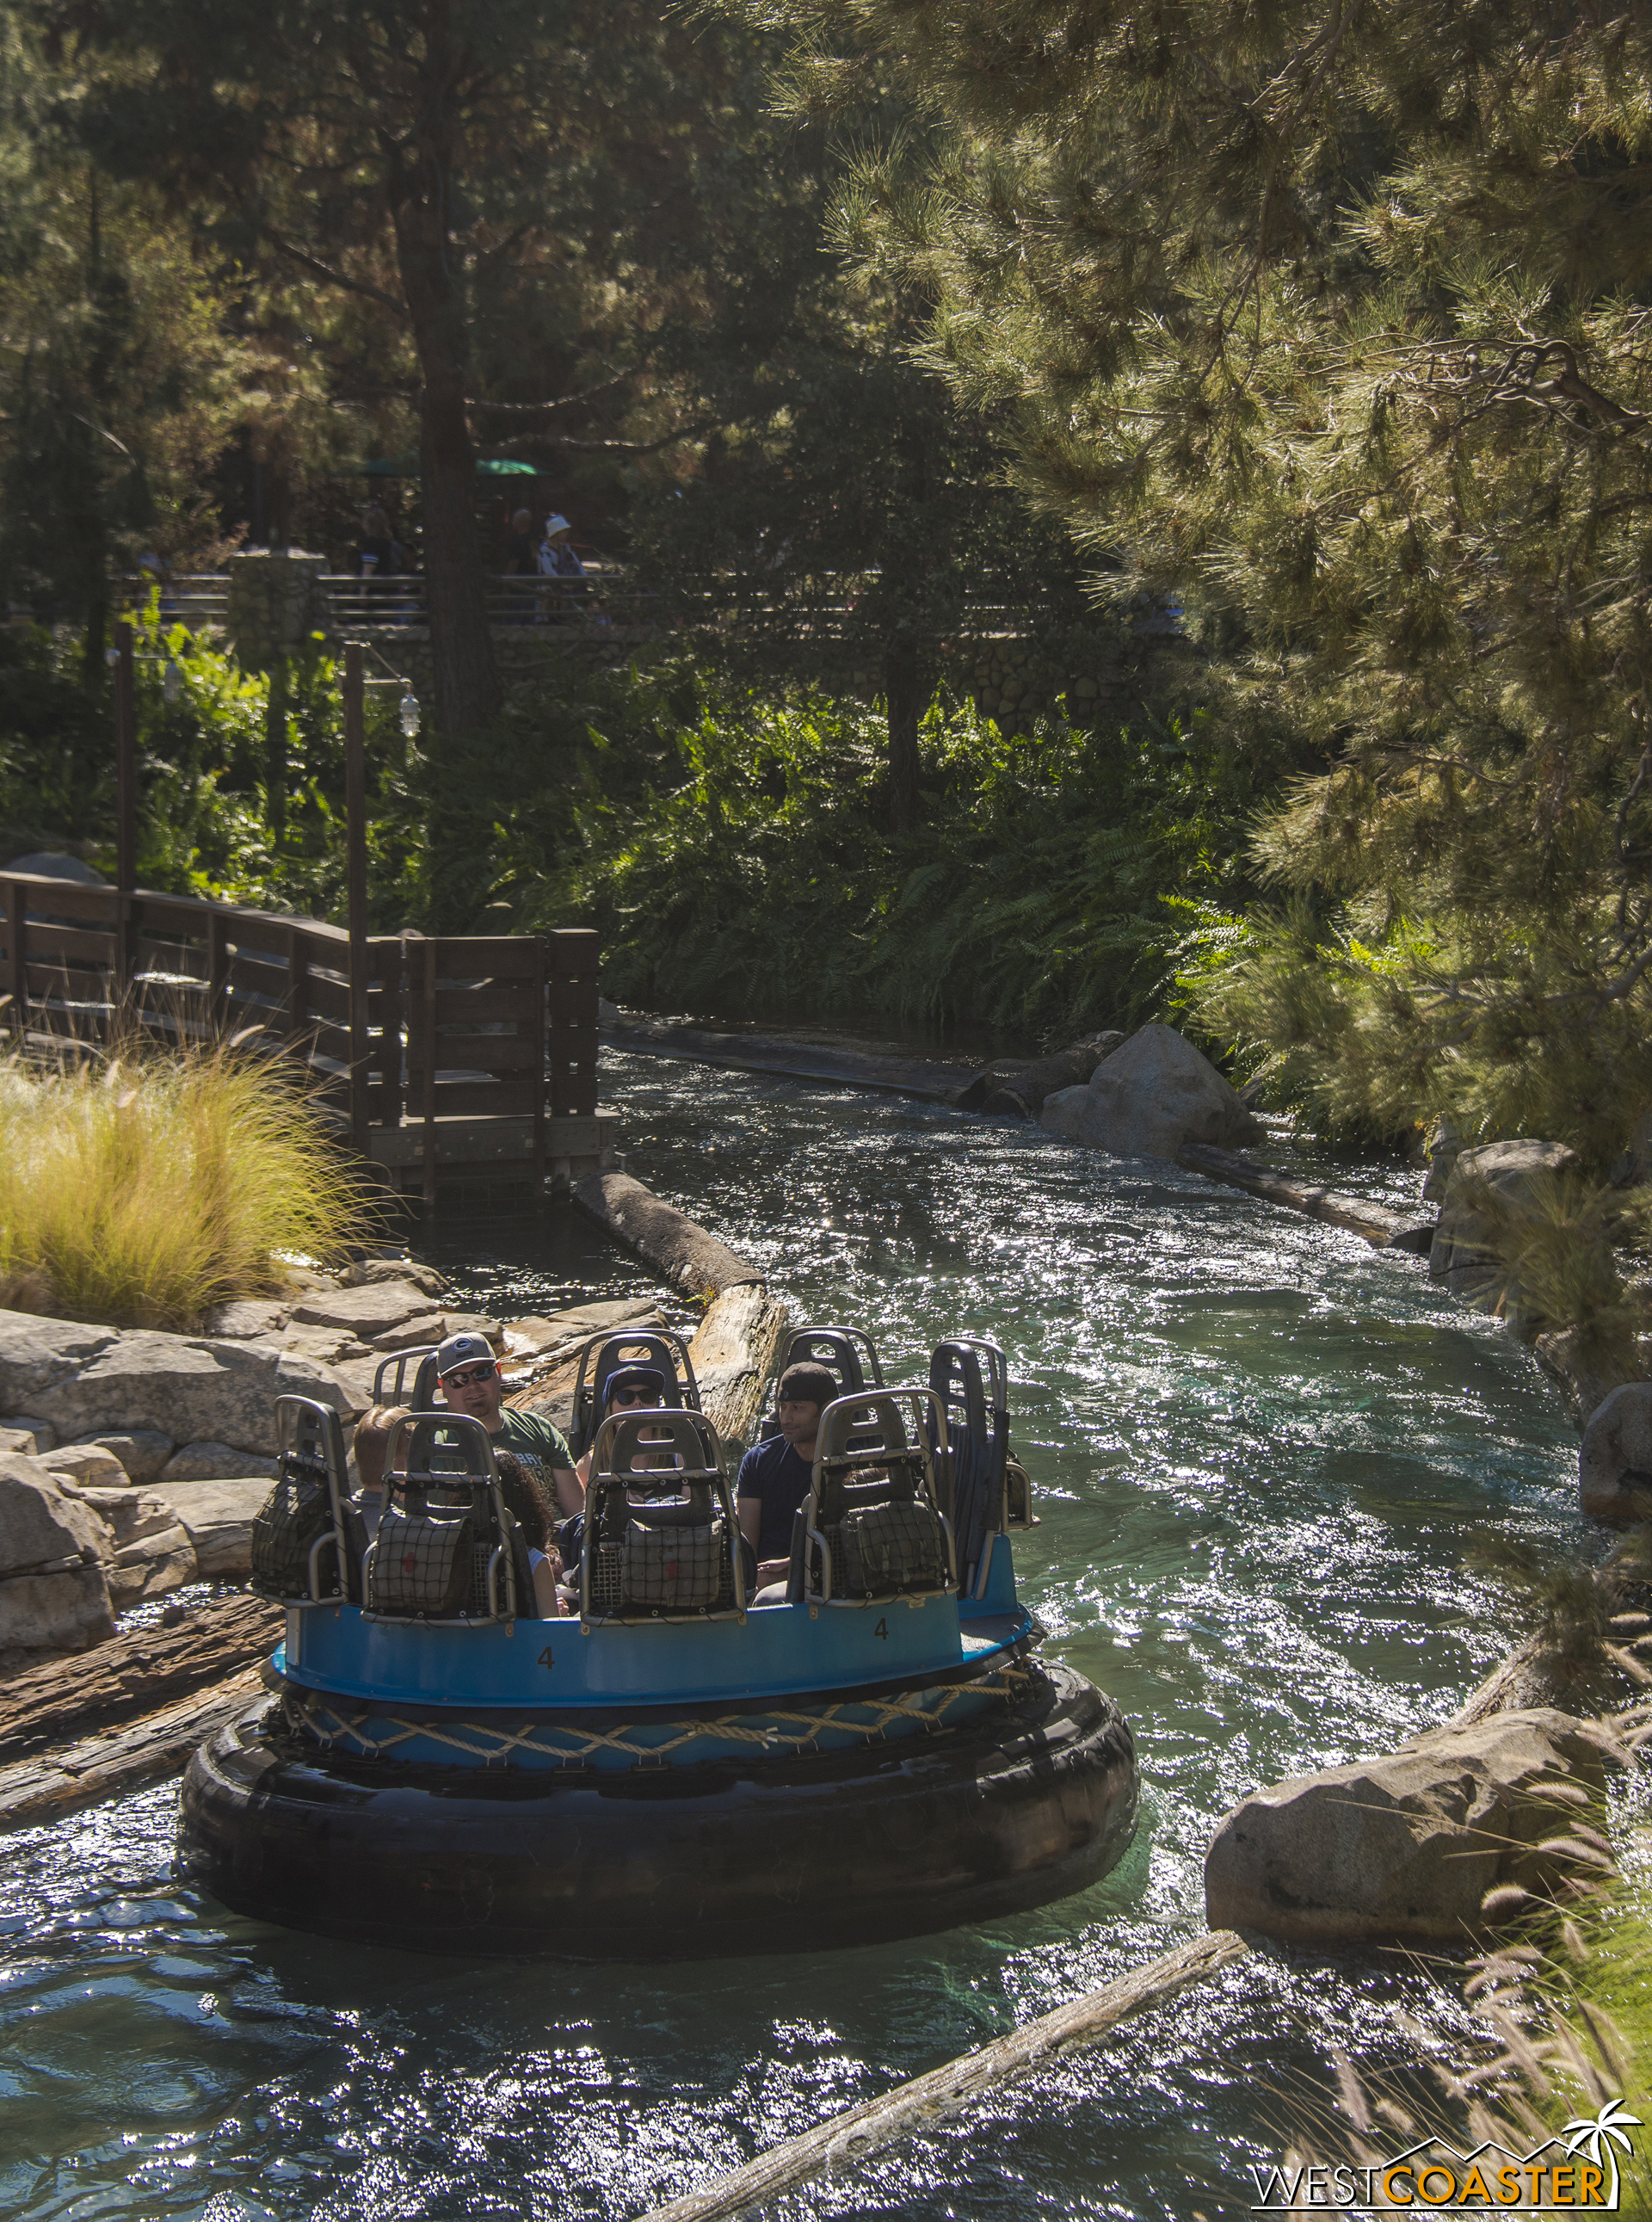  "Real" water ride means the type that goes splish splash. 